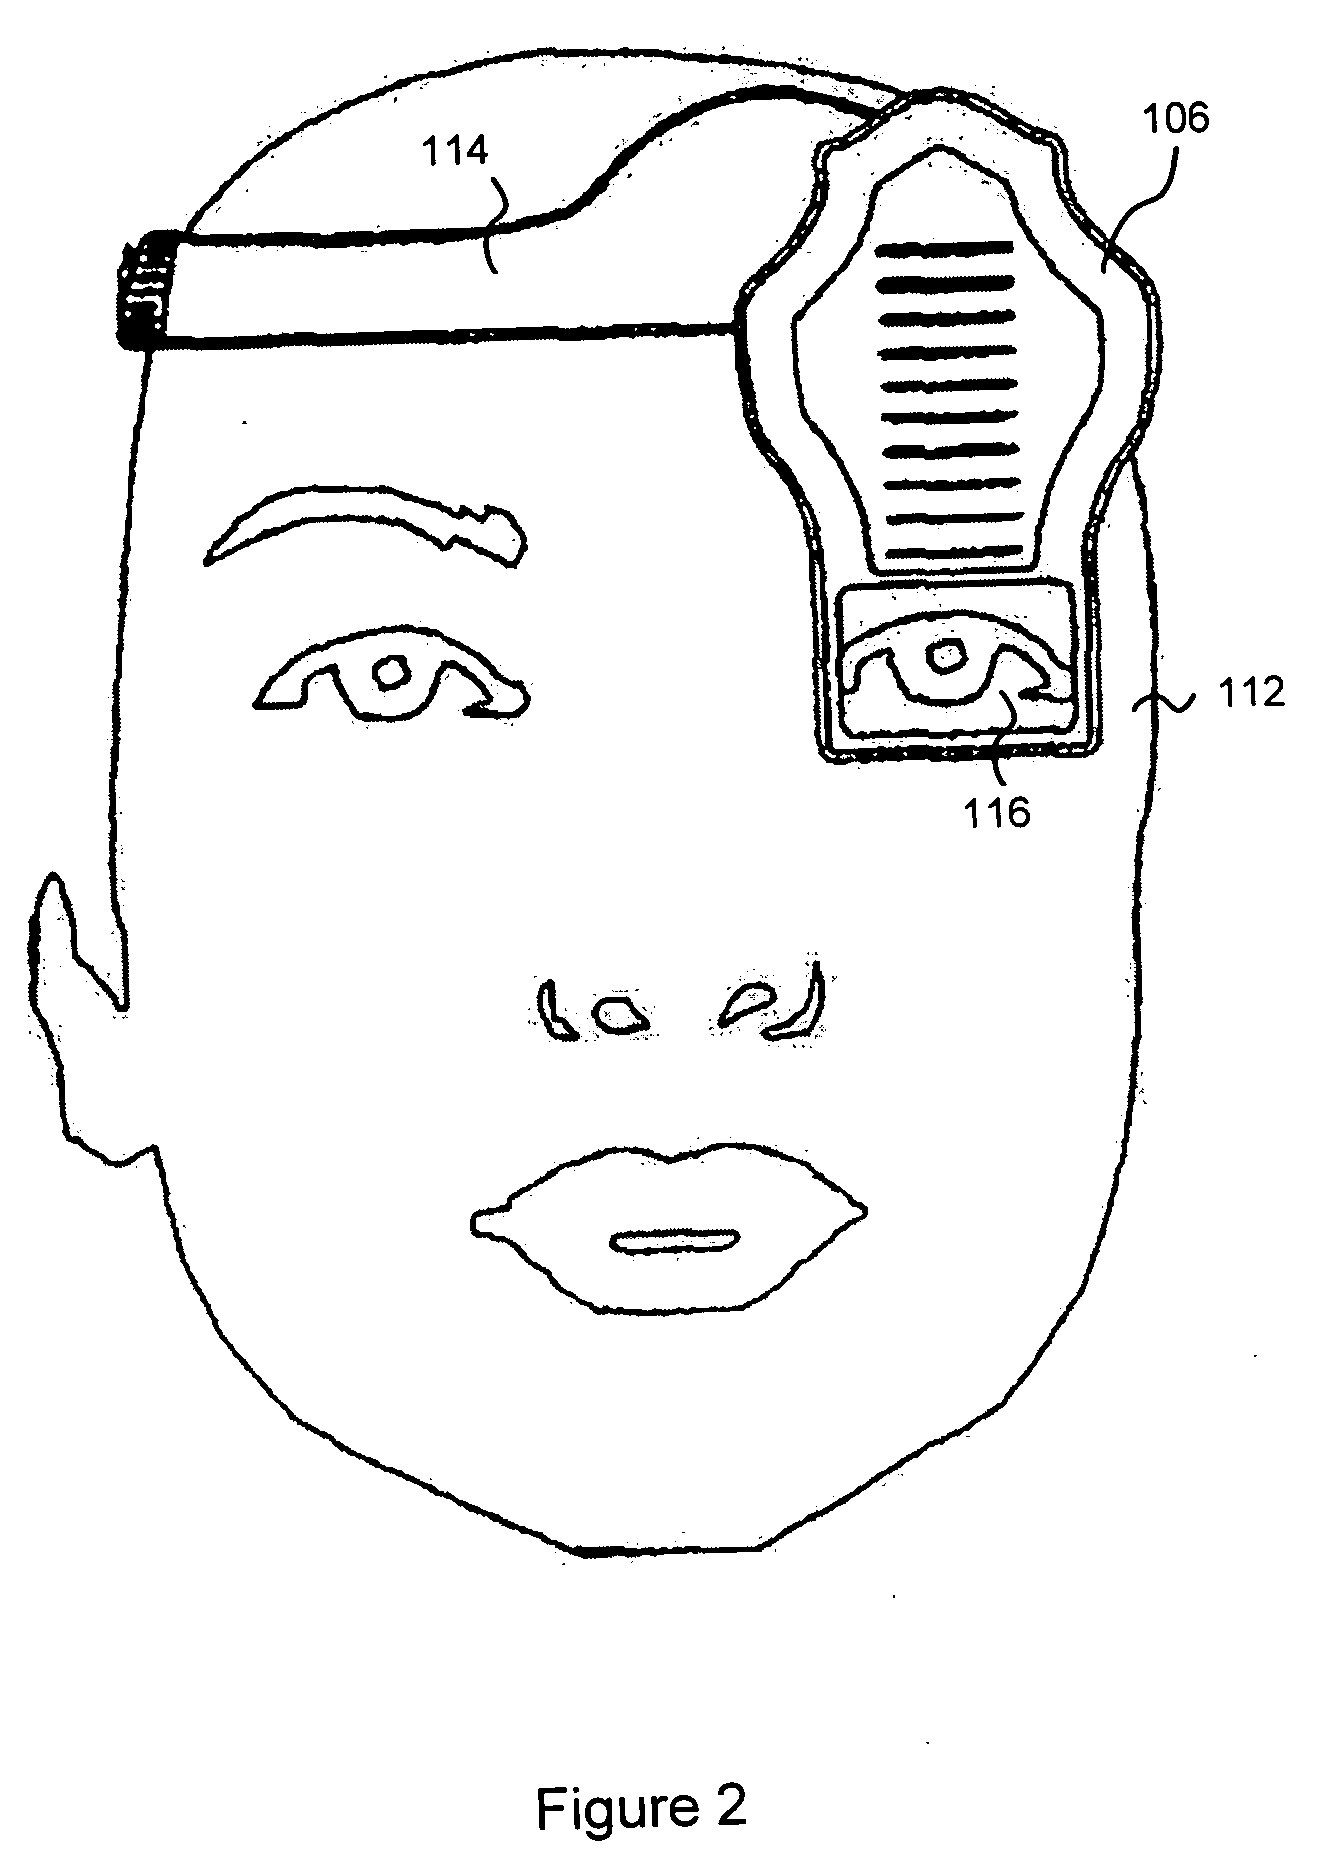 Intra-oral imaging system